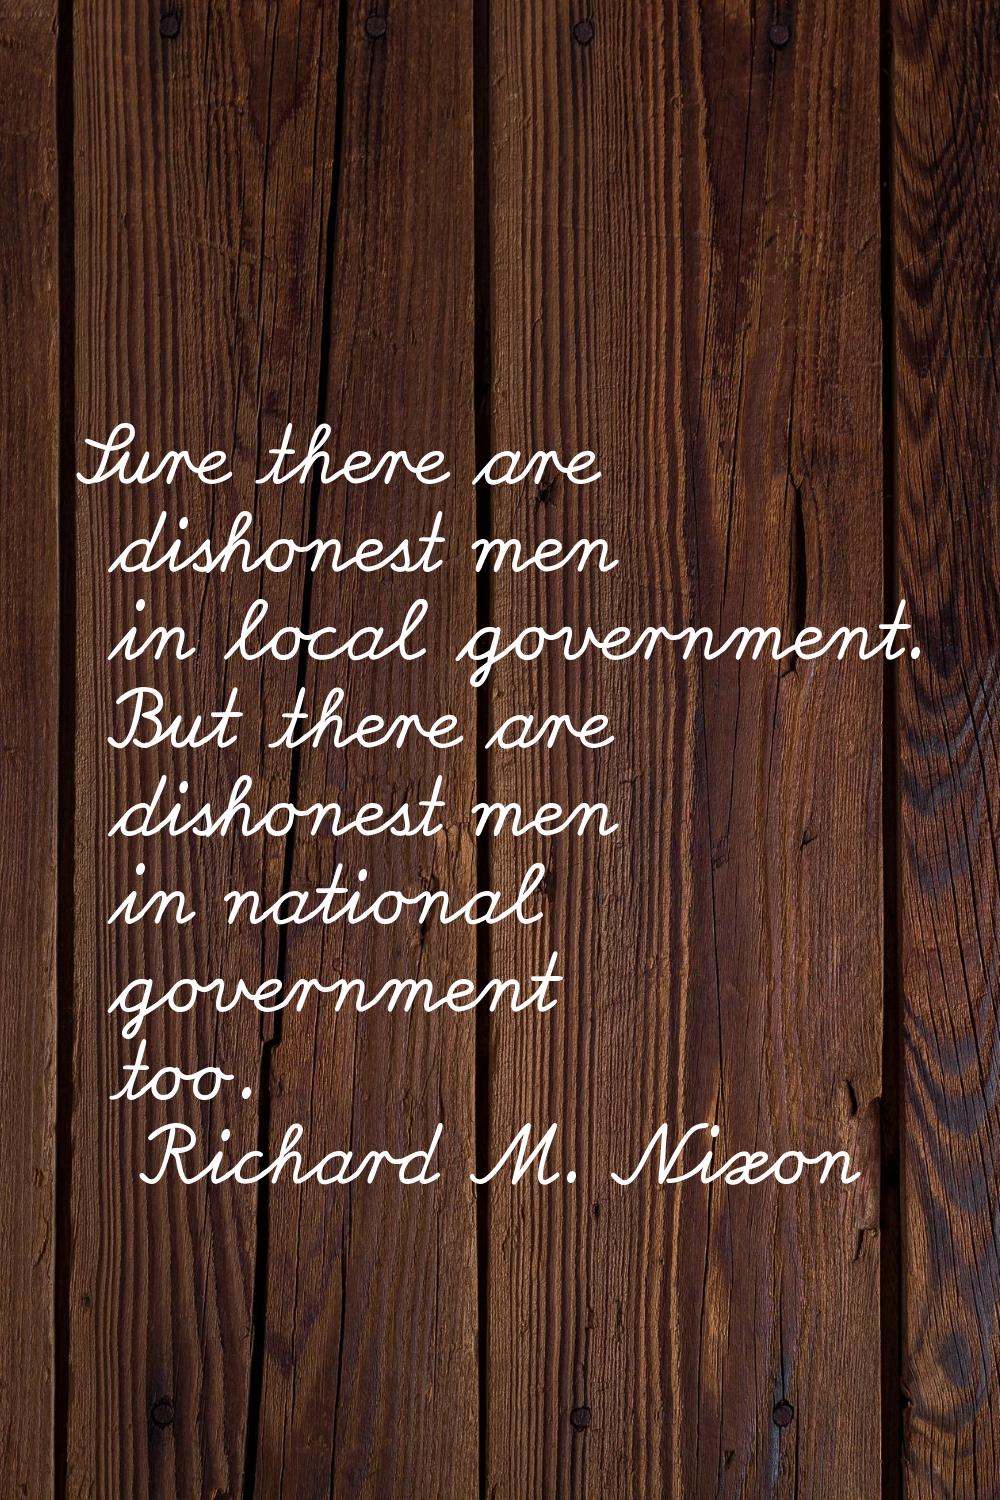 Sure there are dishonest men in local government. But there are dishonest men in national governmen